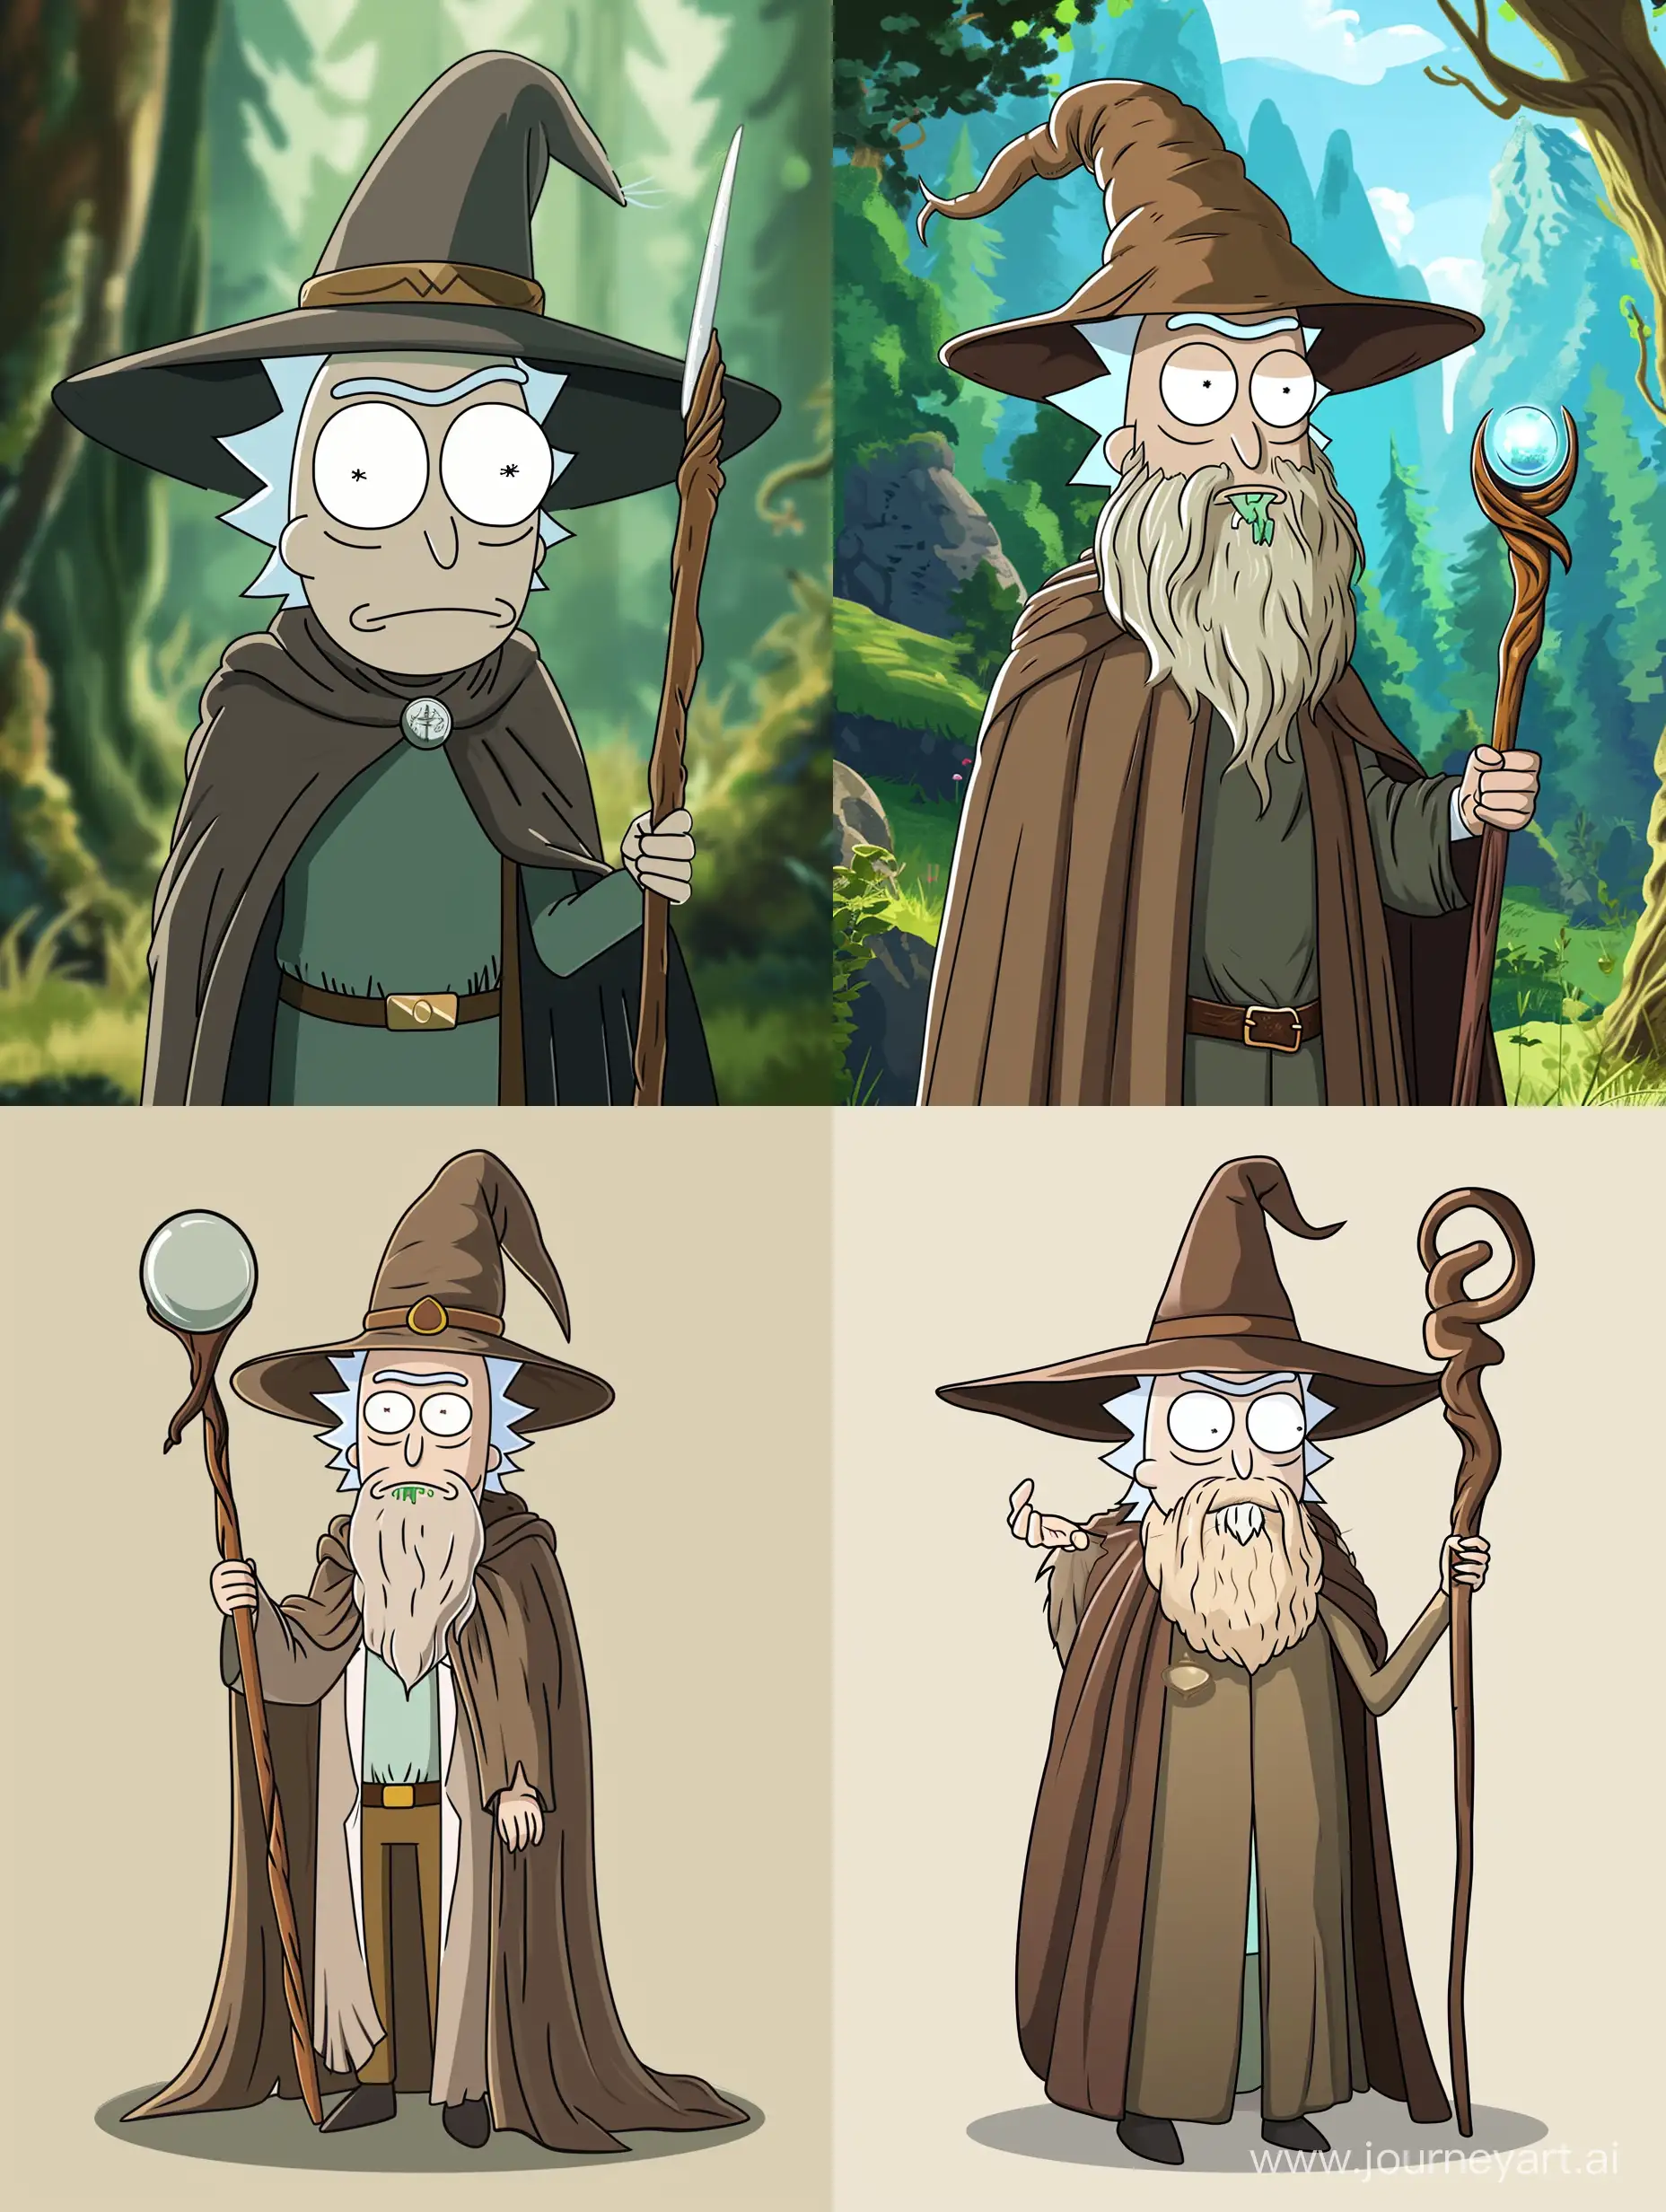 Gandalf-in-the-Style-of-Rick-and-Morty-Cartoon